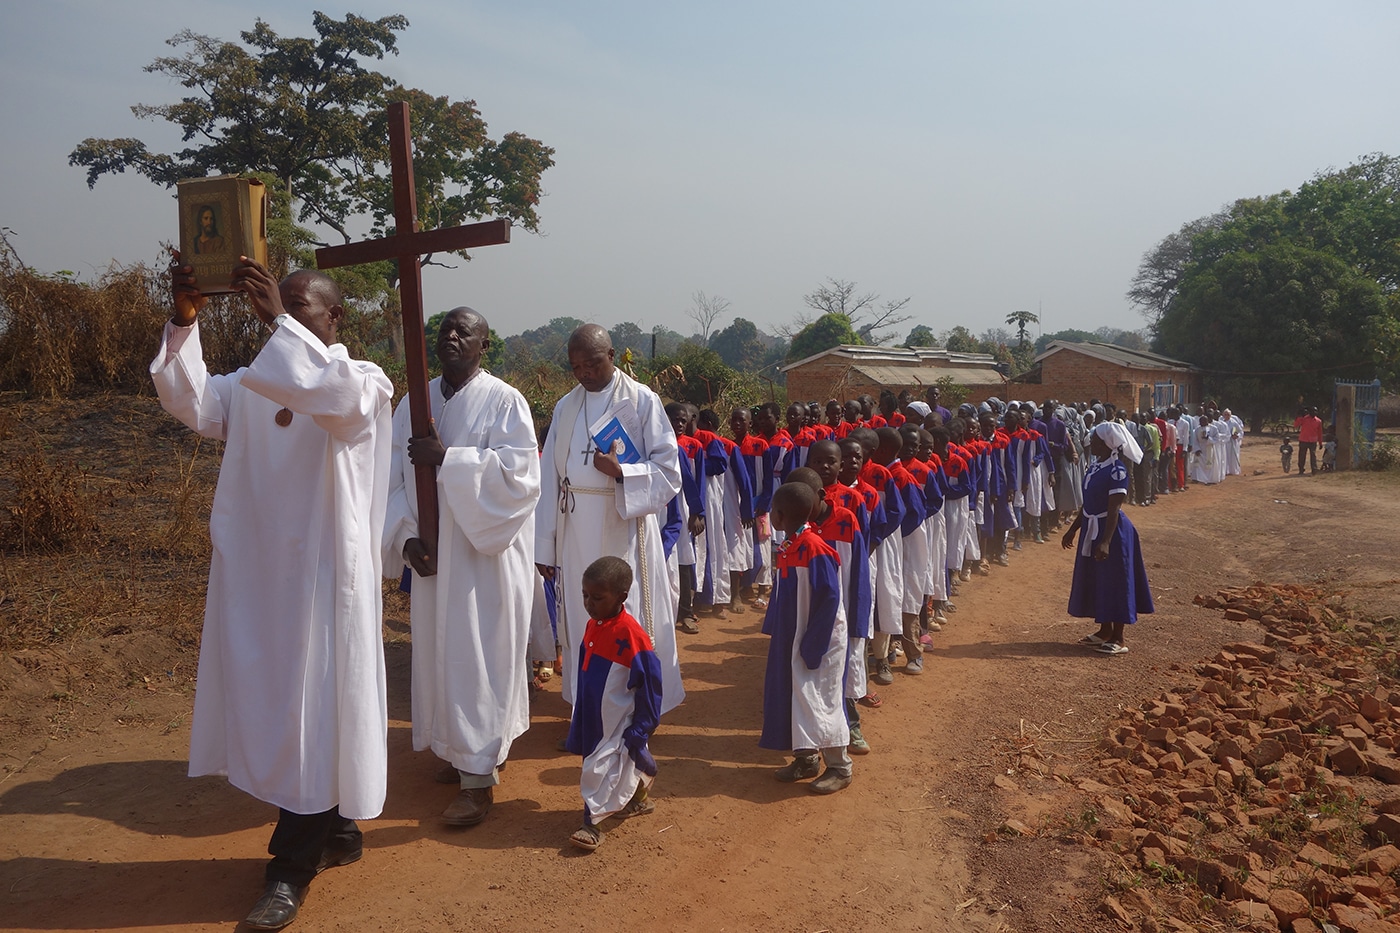 Procession of pastors and children's choir through Yambio, South Sudan